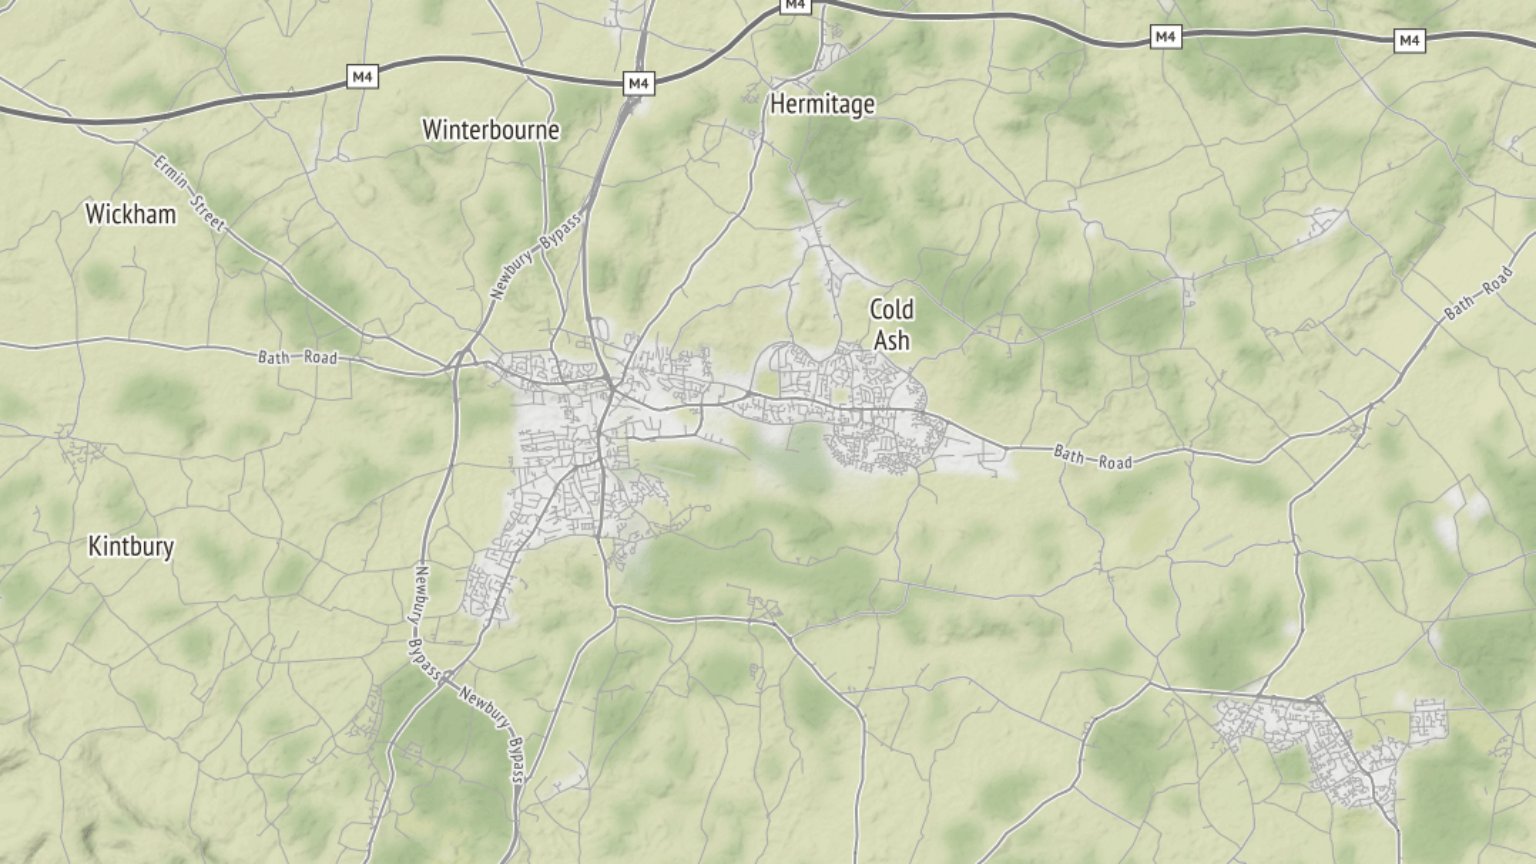 A blended map of West Berkshire showing terrain lines and watercolour.